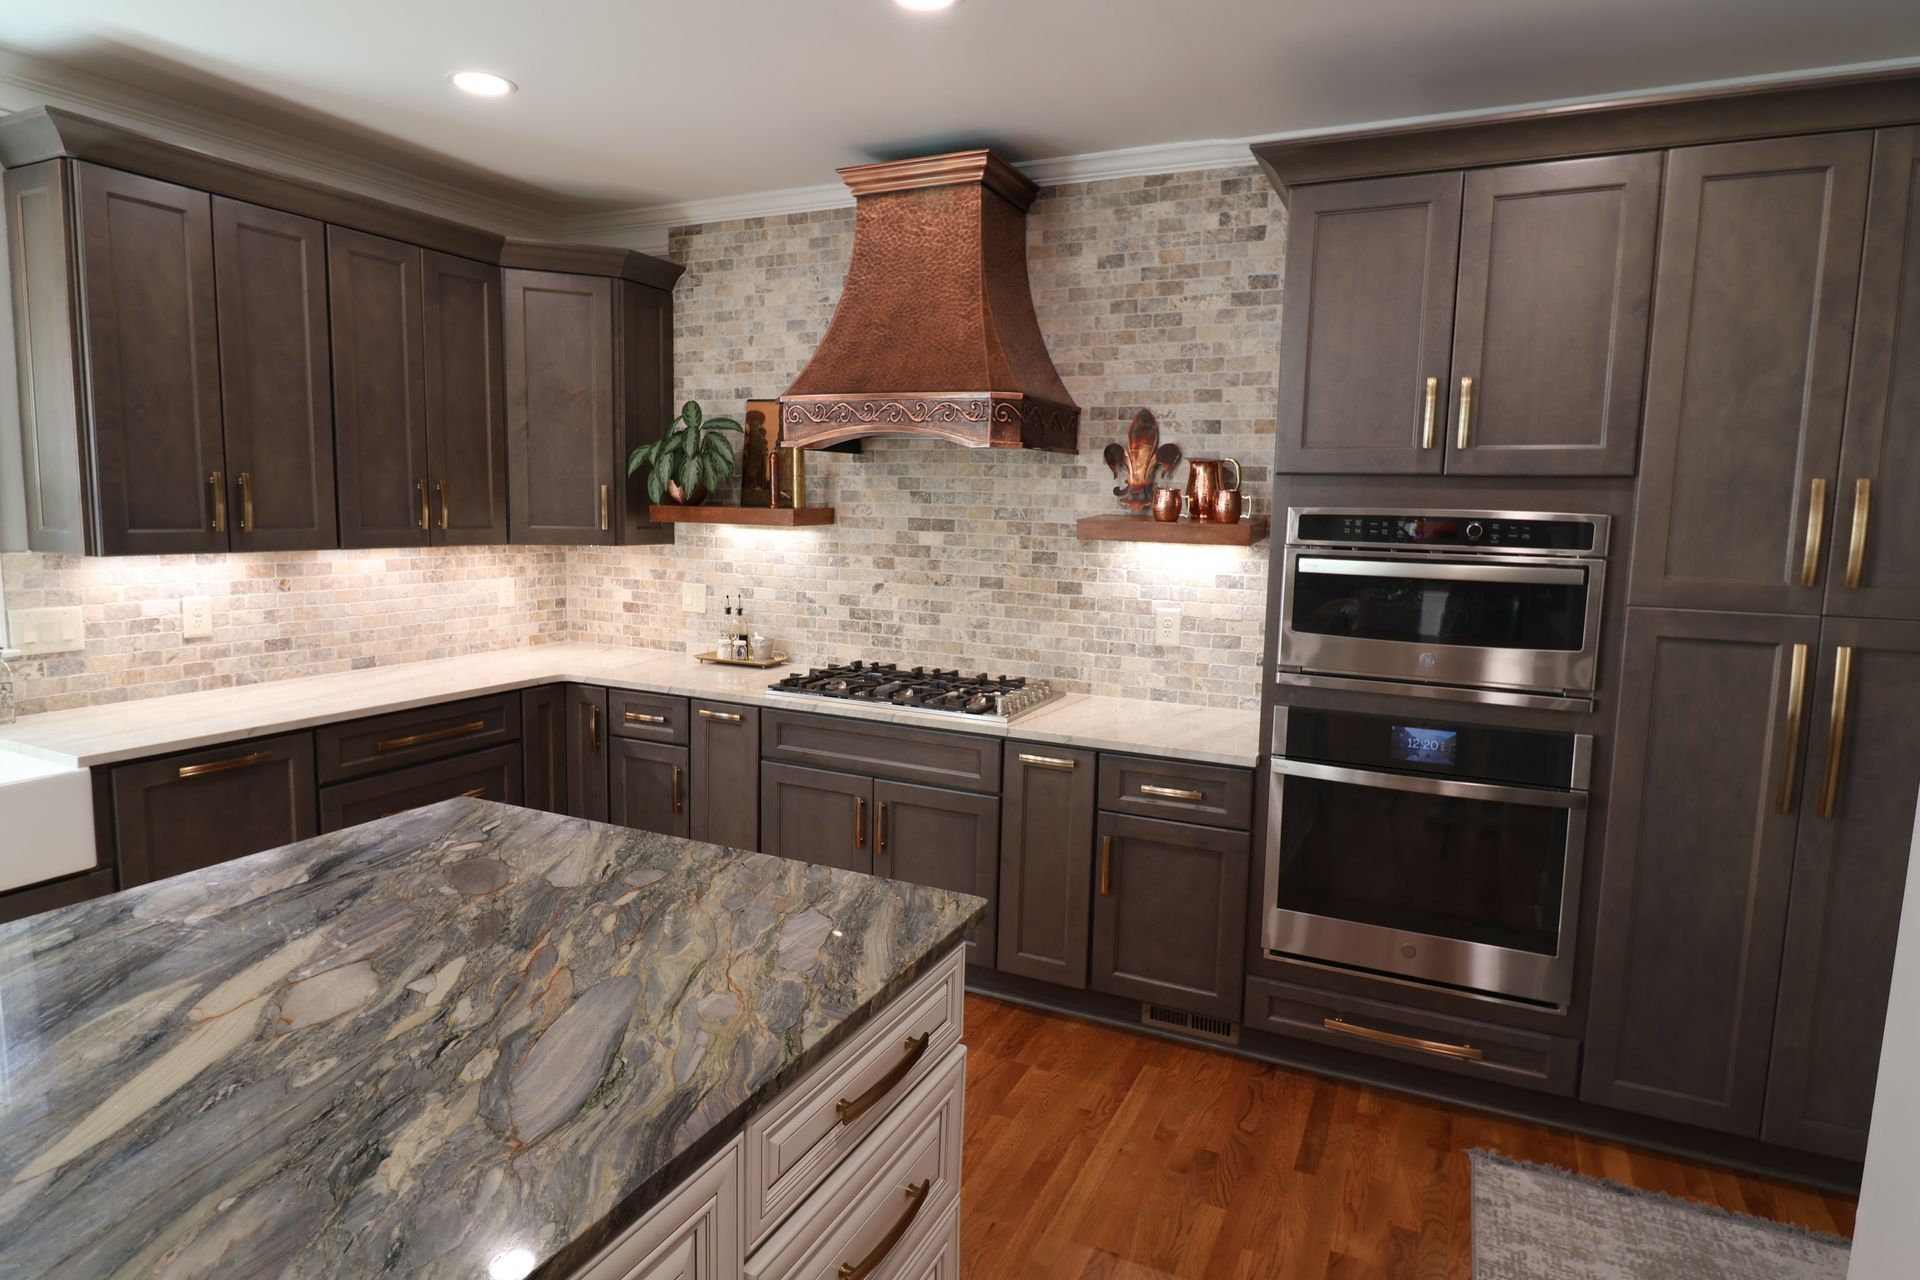 A kitchen with gray cabinets , granite counter tops , stainless steel appliances and a copper hood.